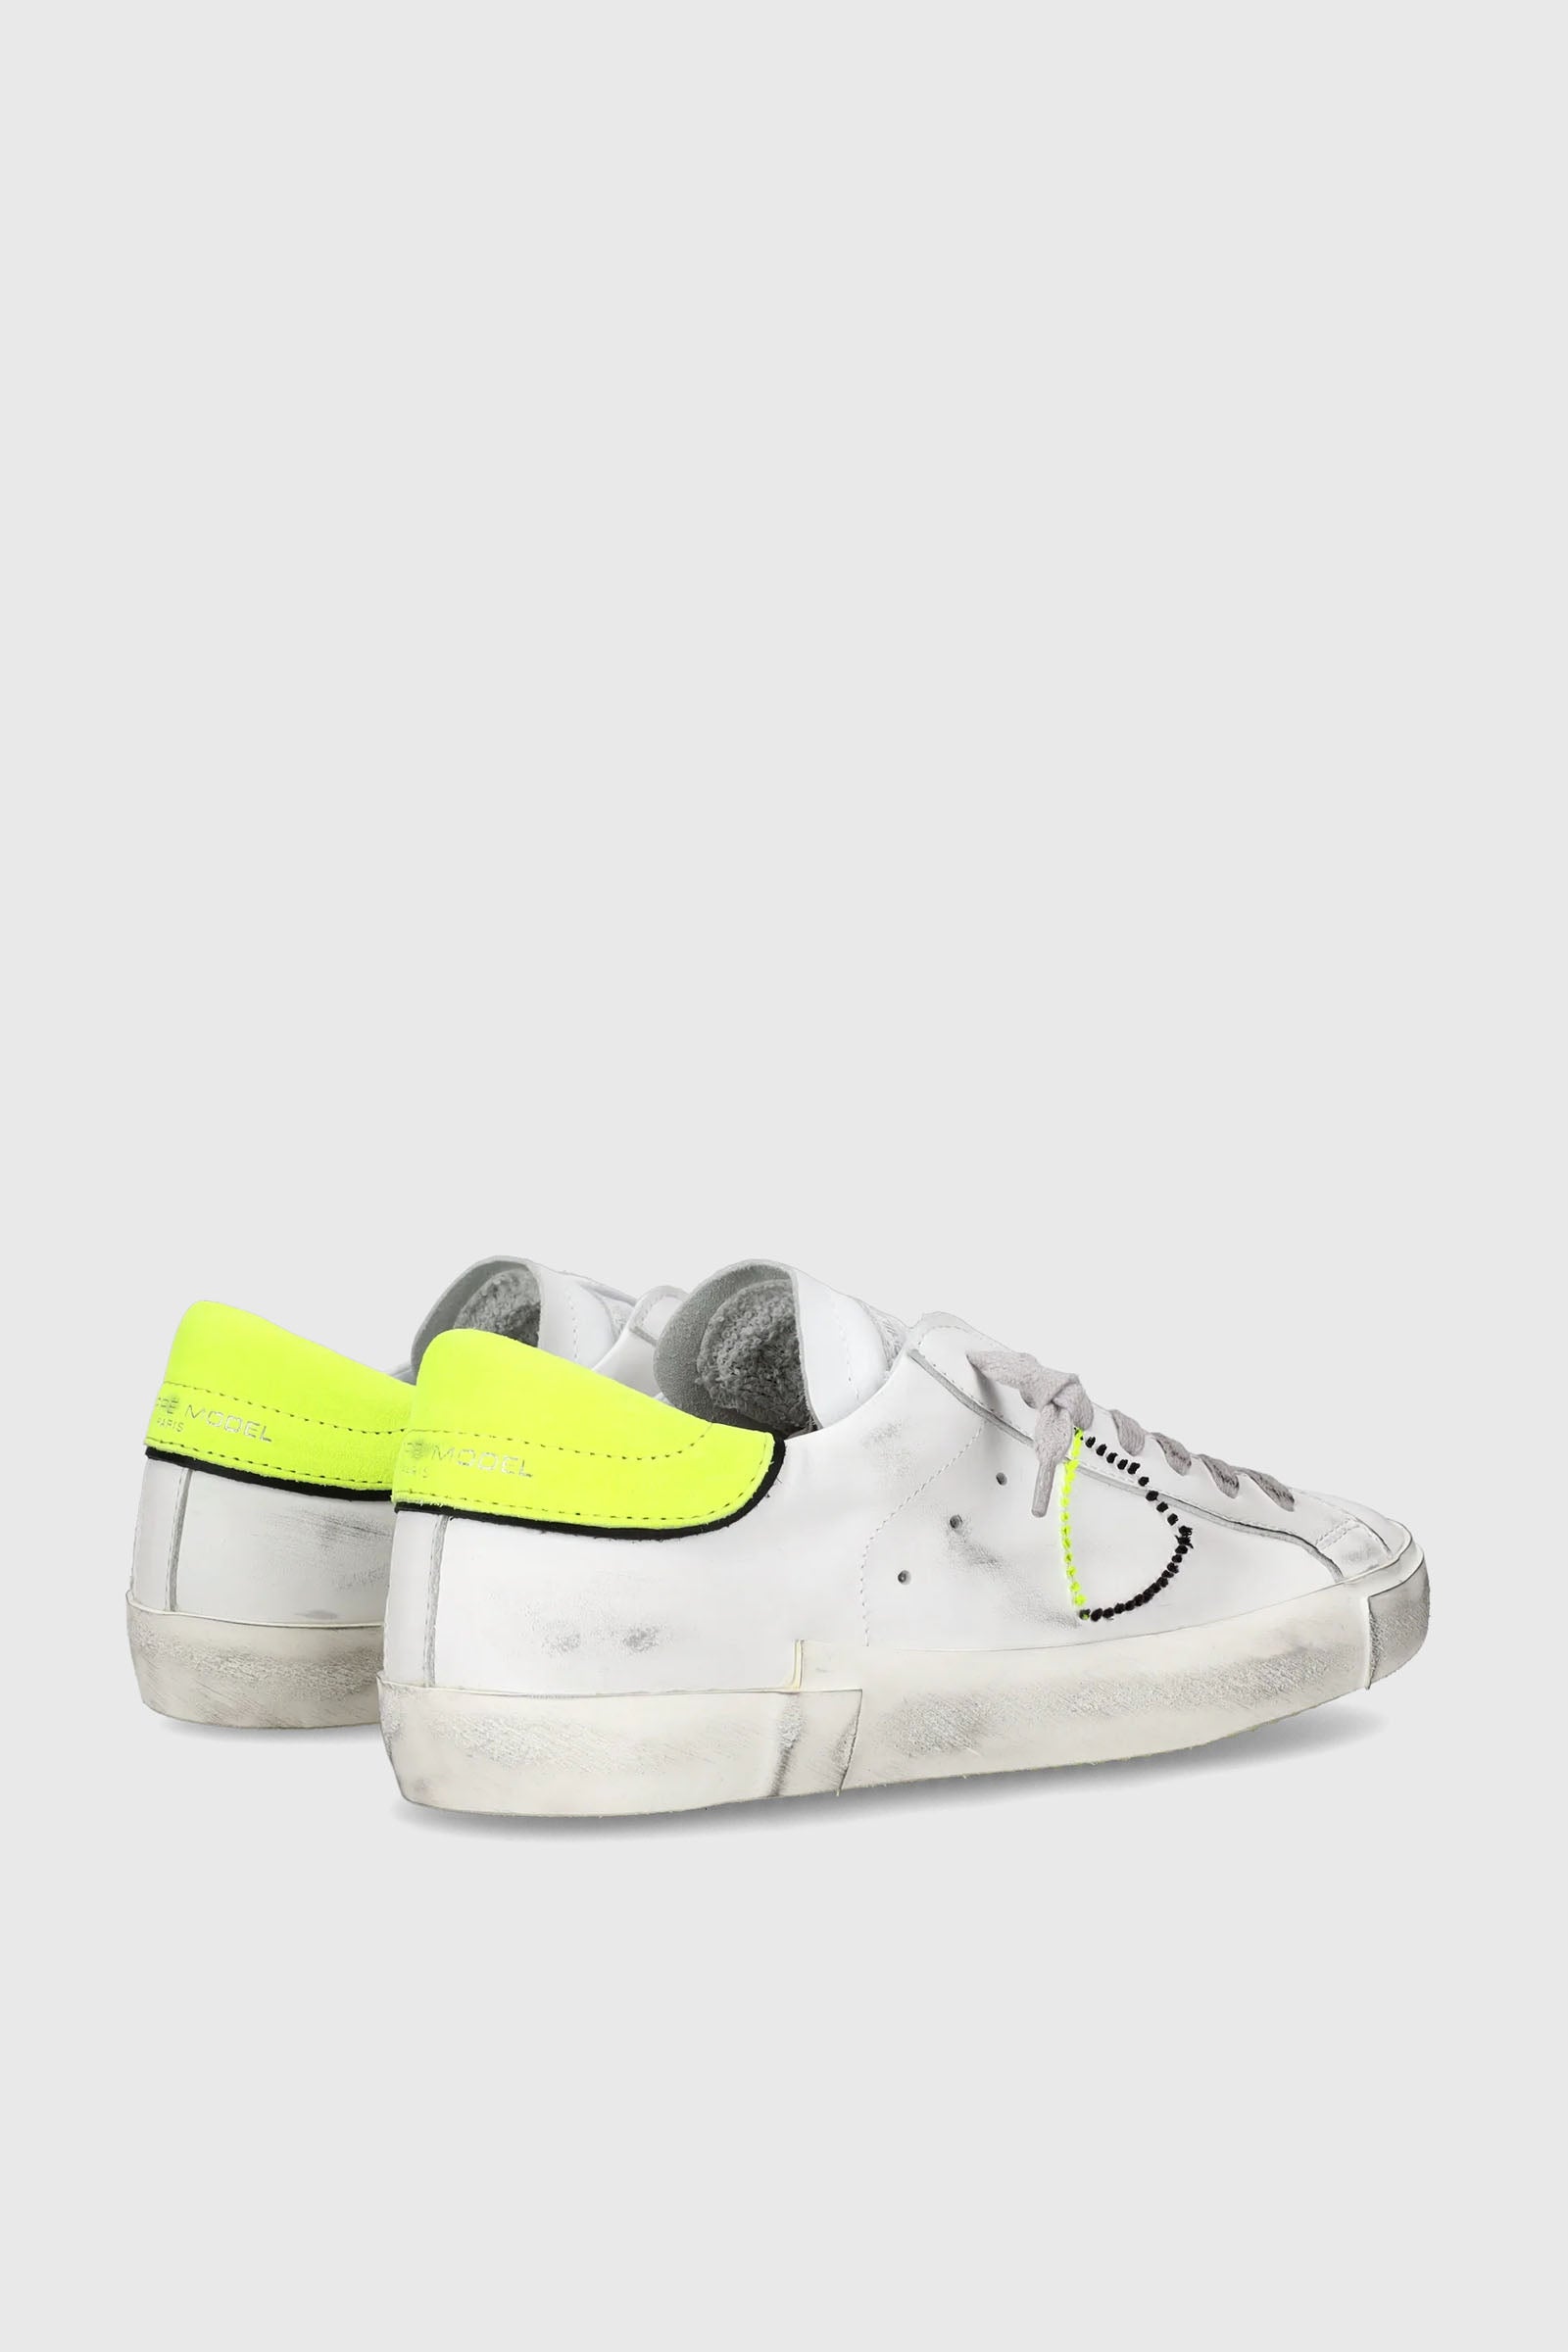 Philippe Model Sneakers PRSX Veau Broderie Pelle Bianco/Giallo Fluo - 3